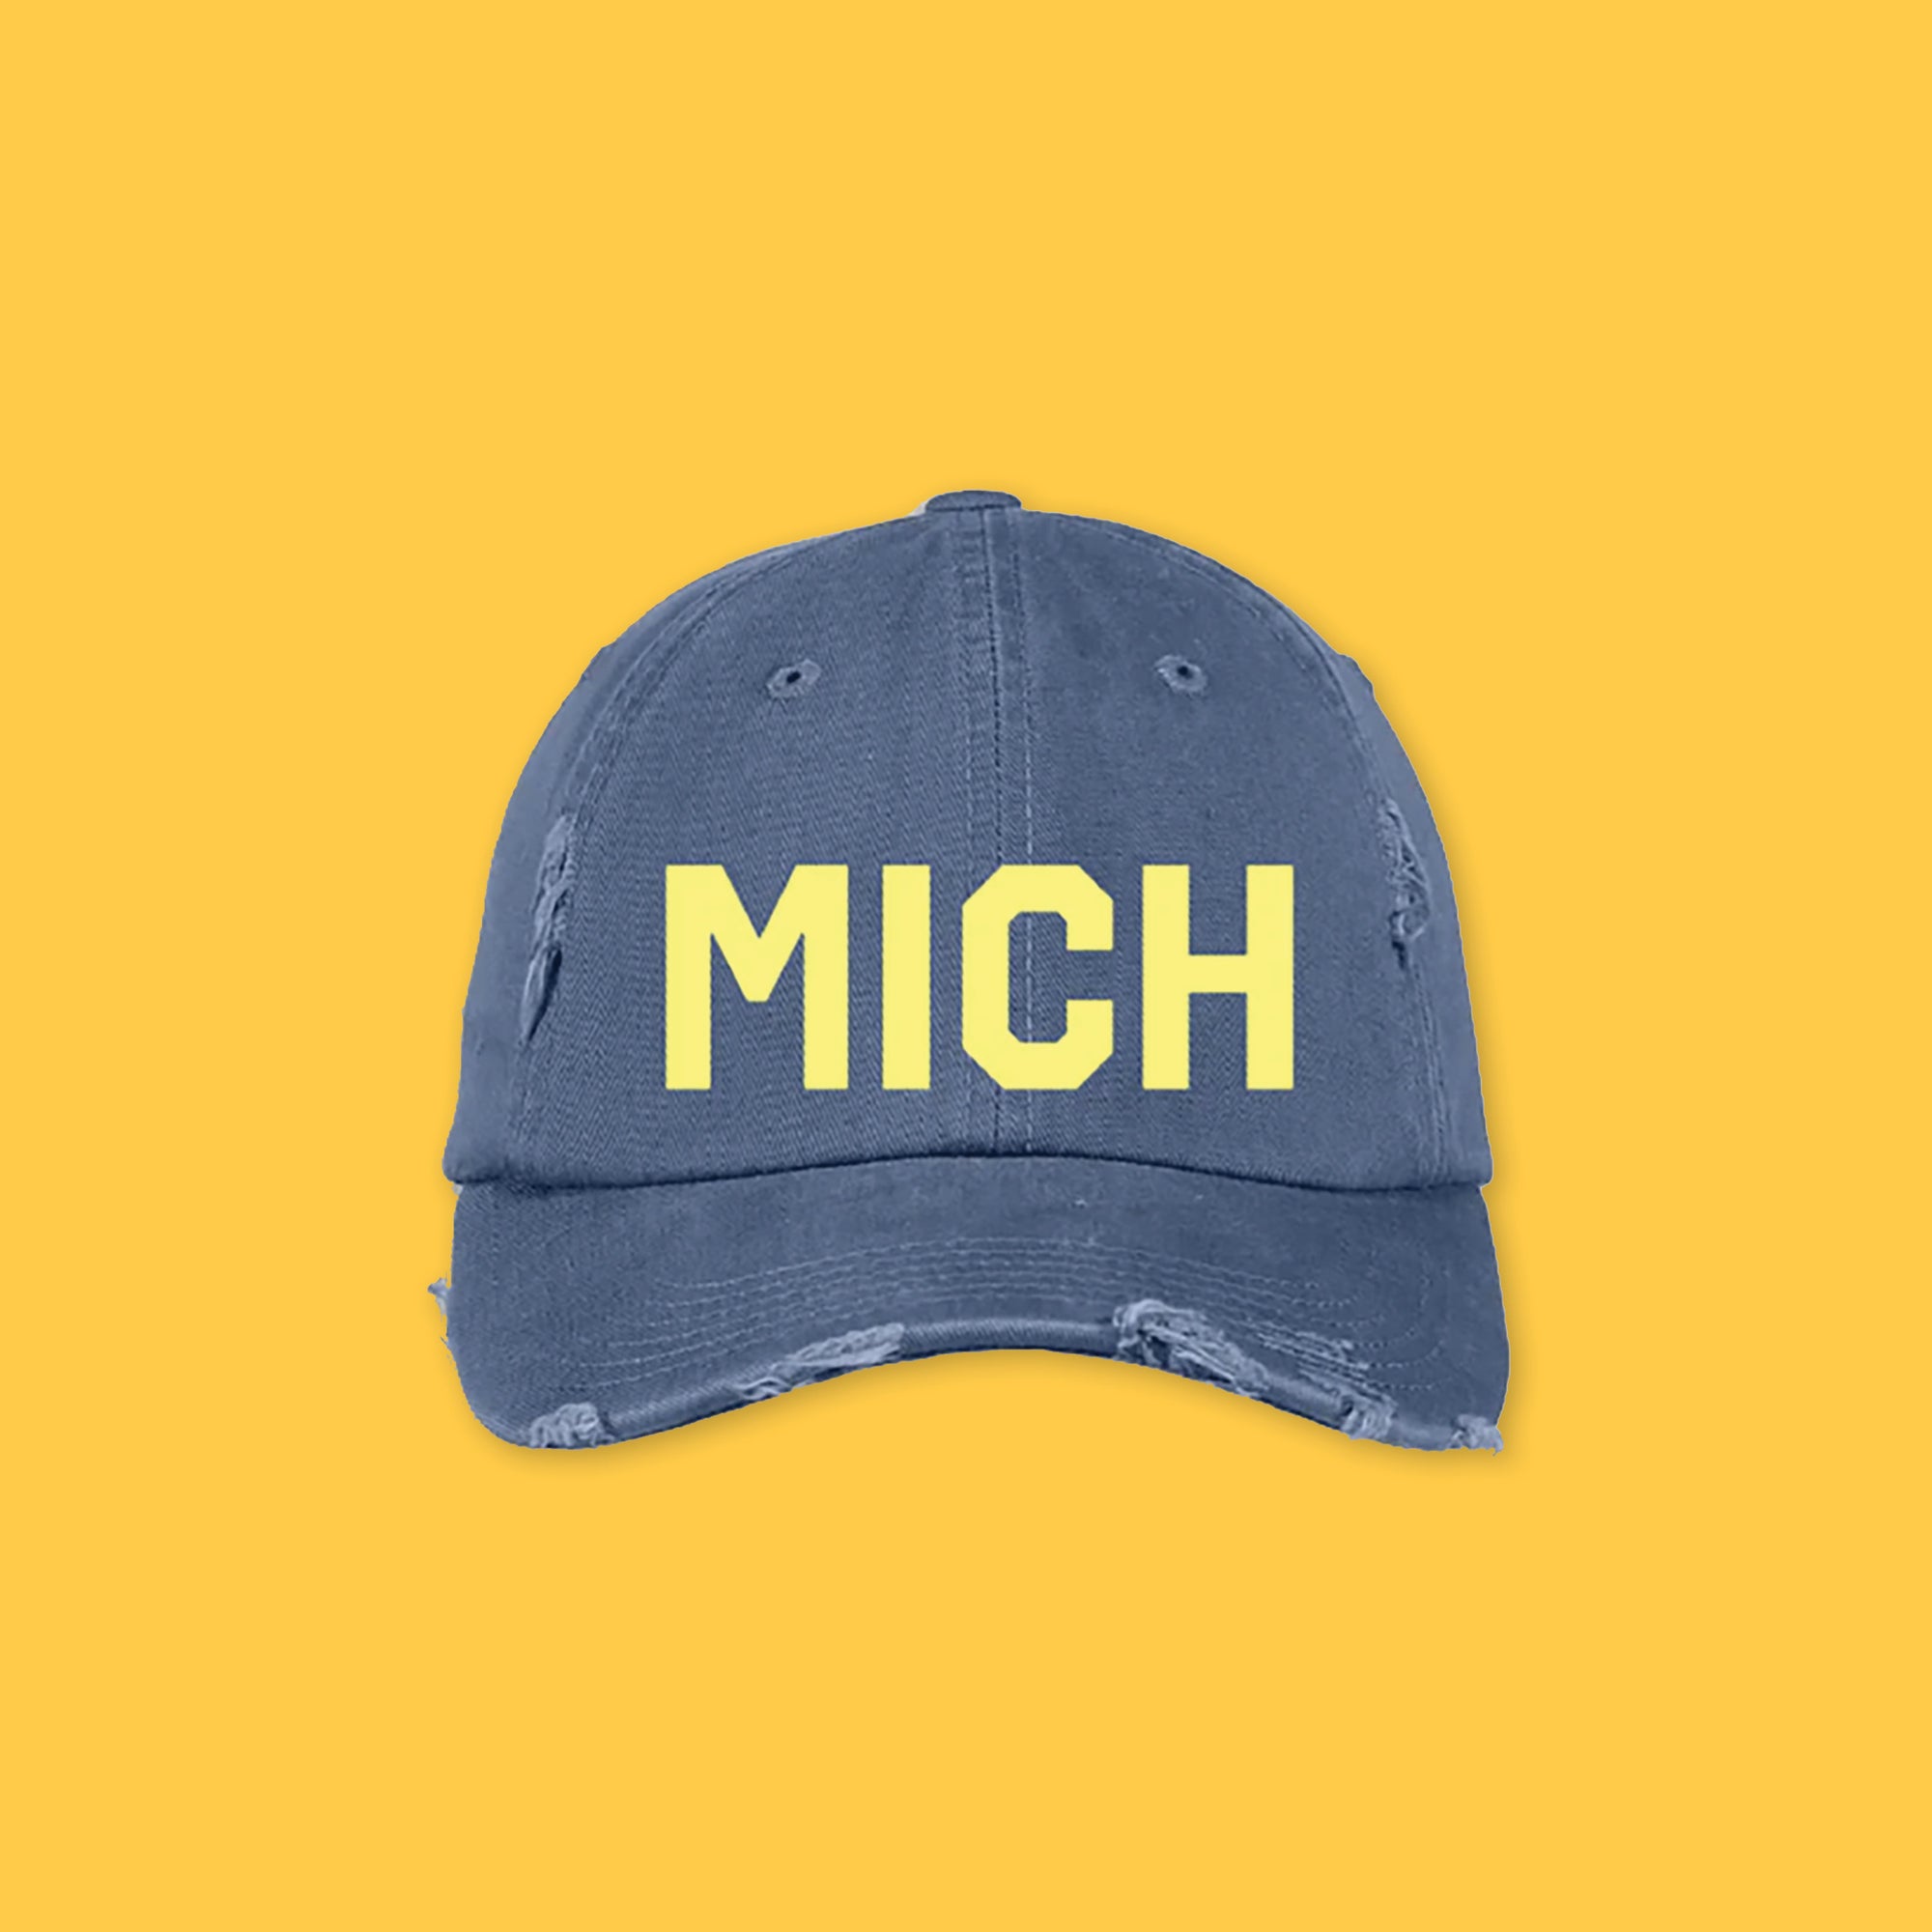 On a sunny mustard background sits a navy hat. The hat is distressed with bold, yellow embroidered lettering that says "MICH."